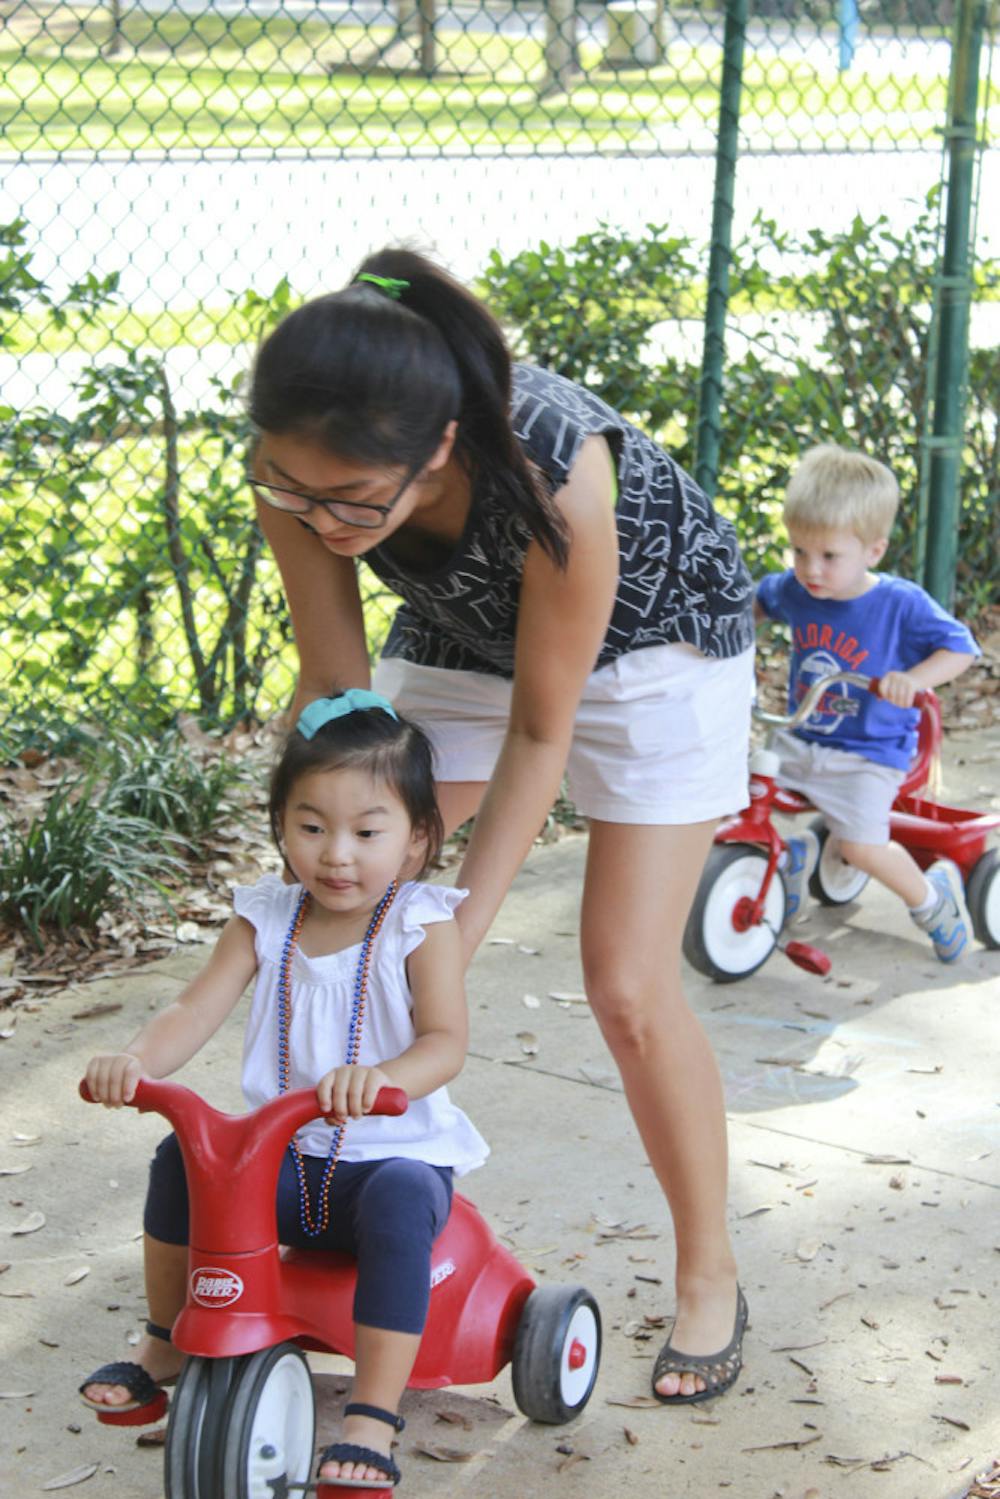 <p>Former UF PhD student Soon Hye Yang, 34, pushes her 3-year-old daughter, Isu Yoon, on a tricycle at the Baby Gator daycare center on Nov. 5, 2015. Baby Gator’s request for additional funding was denied, and without it, student parents like Yang may be cut from the program.</p>